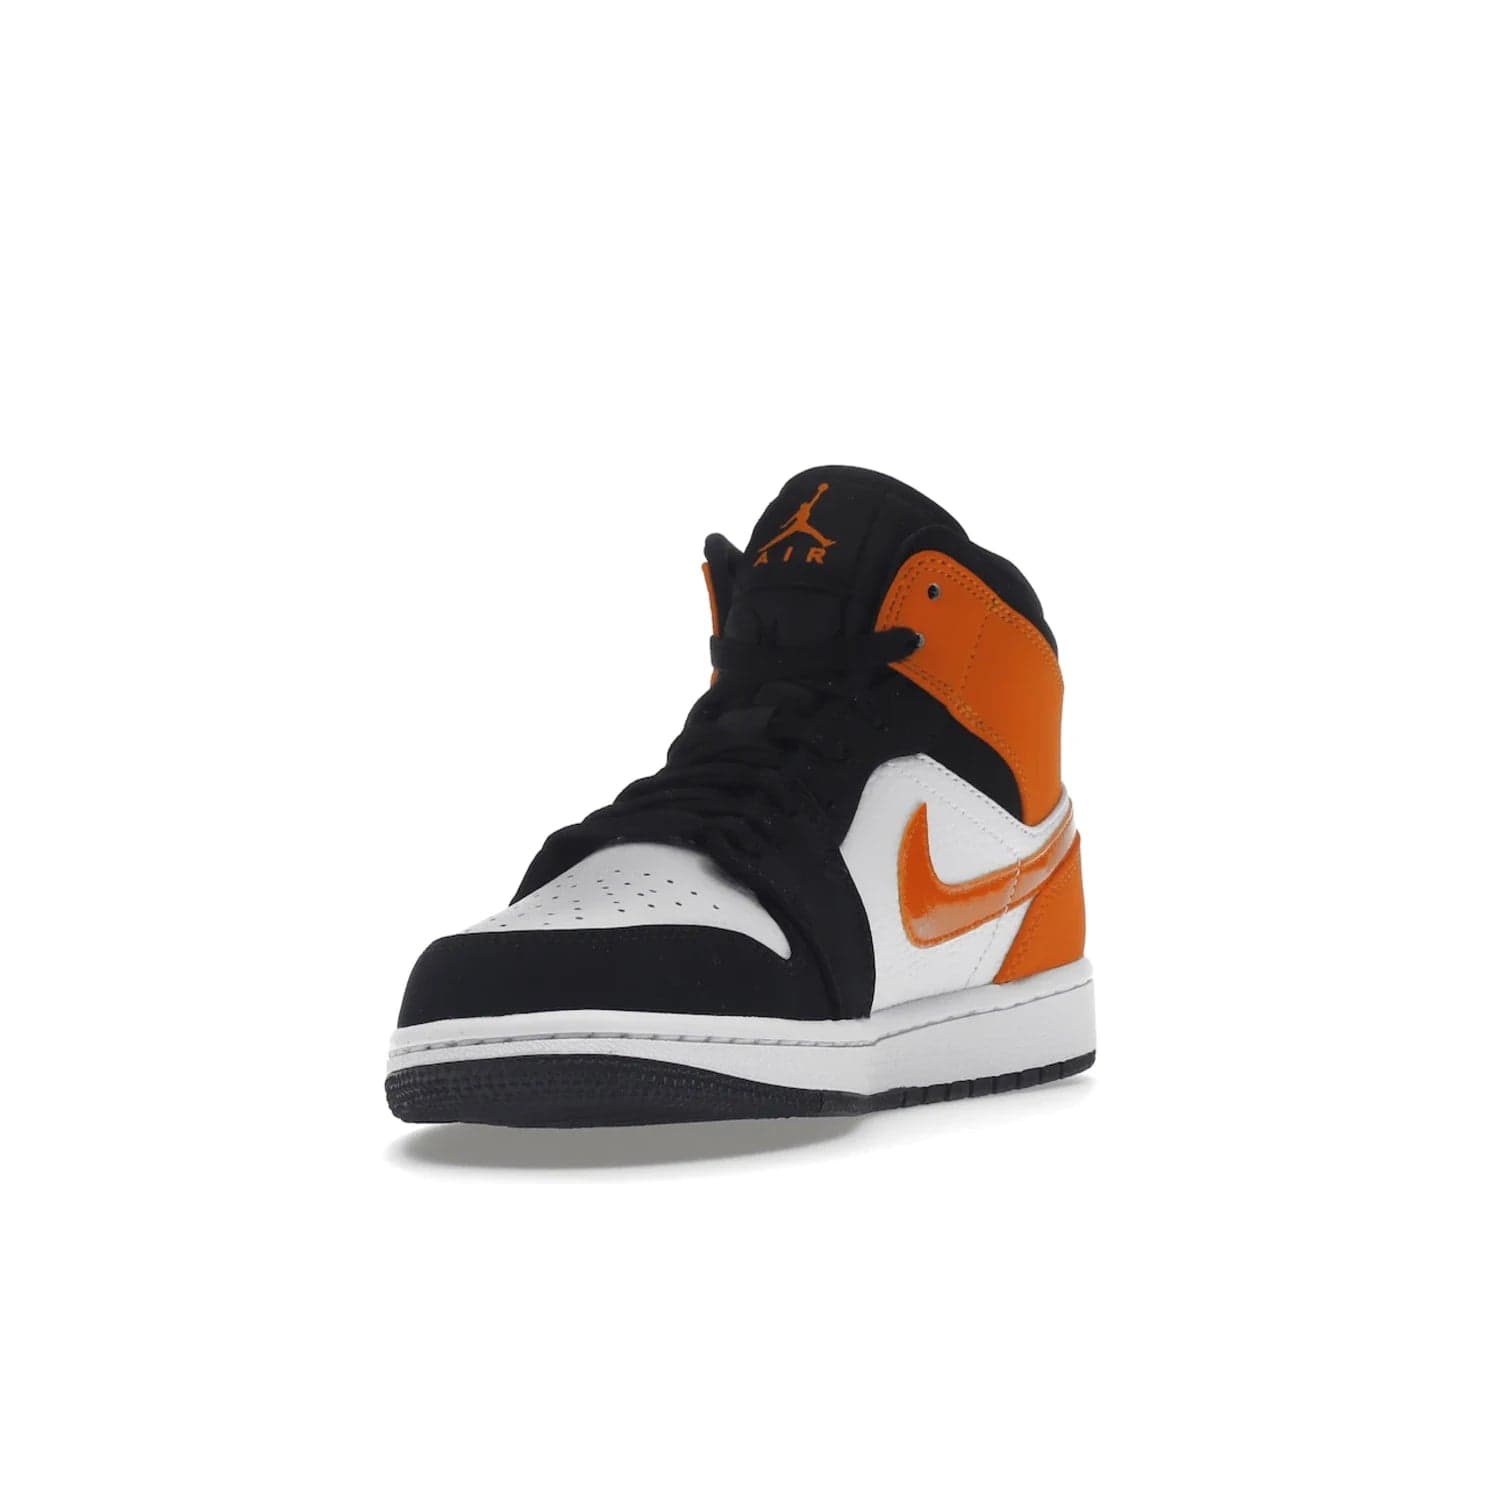 Jordan 1 Mid Shattered Backboard - Image 13 - Only at www.BallersClubKickz.com - The Air Jordan 1 Mid Shattered Backboard offers a timeless Black/White-Starfish colorway. Classic Swoosh logo and AJ insignia plus a shatterd backboard graphic on the insole. Get your pair today!